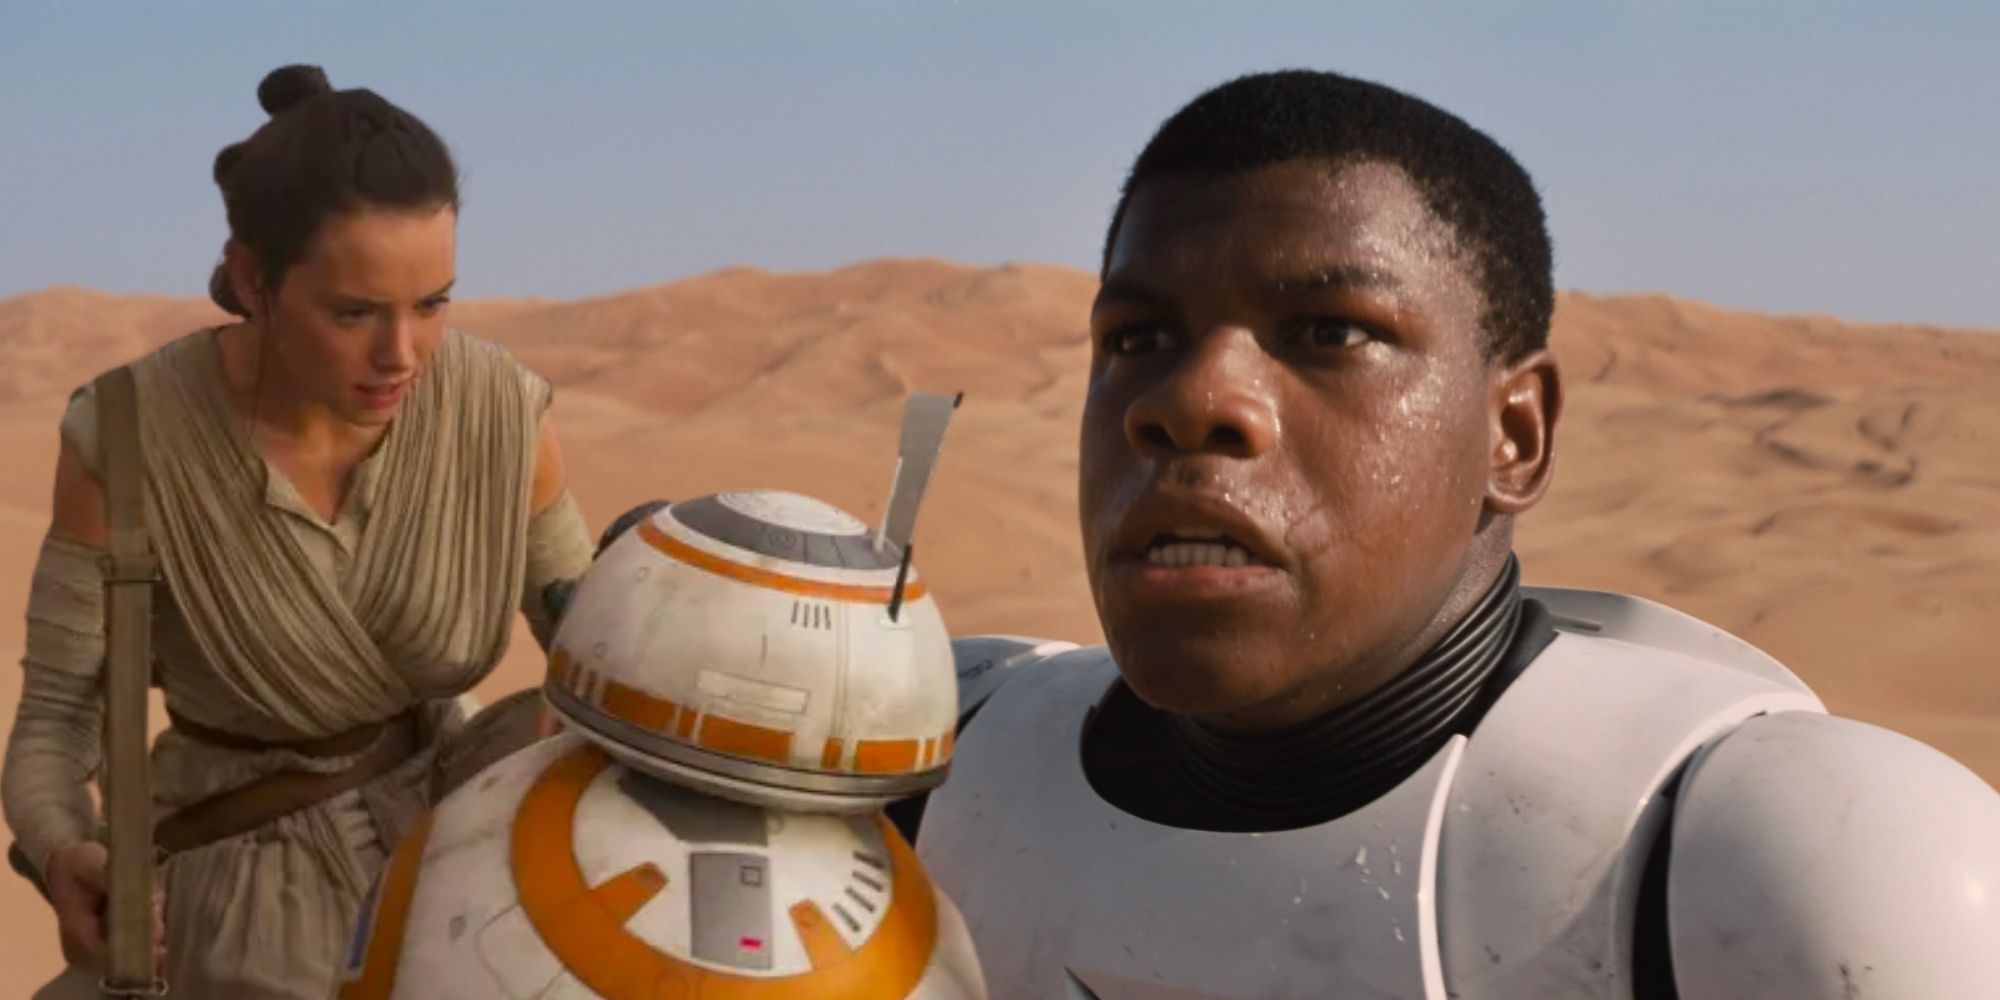 Star Wars the Rise of Skywalker Daisy Ridley John Boyega Rey and BB8 next to Finn in his storm trooper uniform on Tatooine